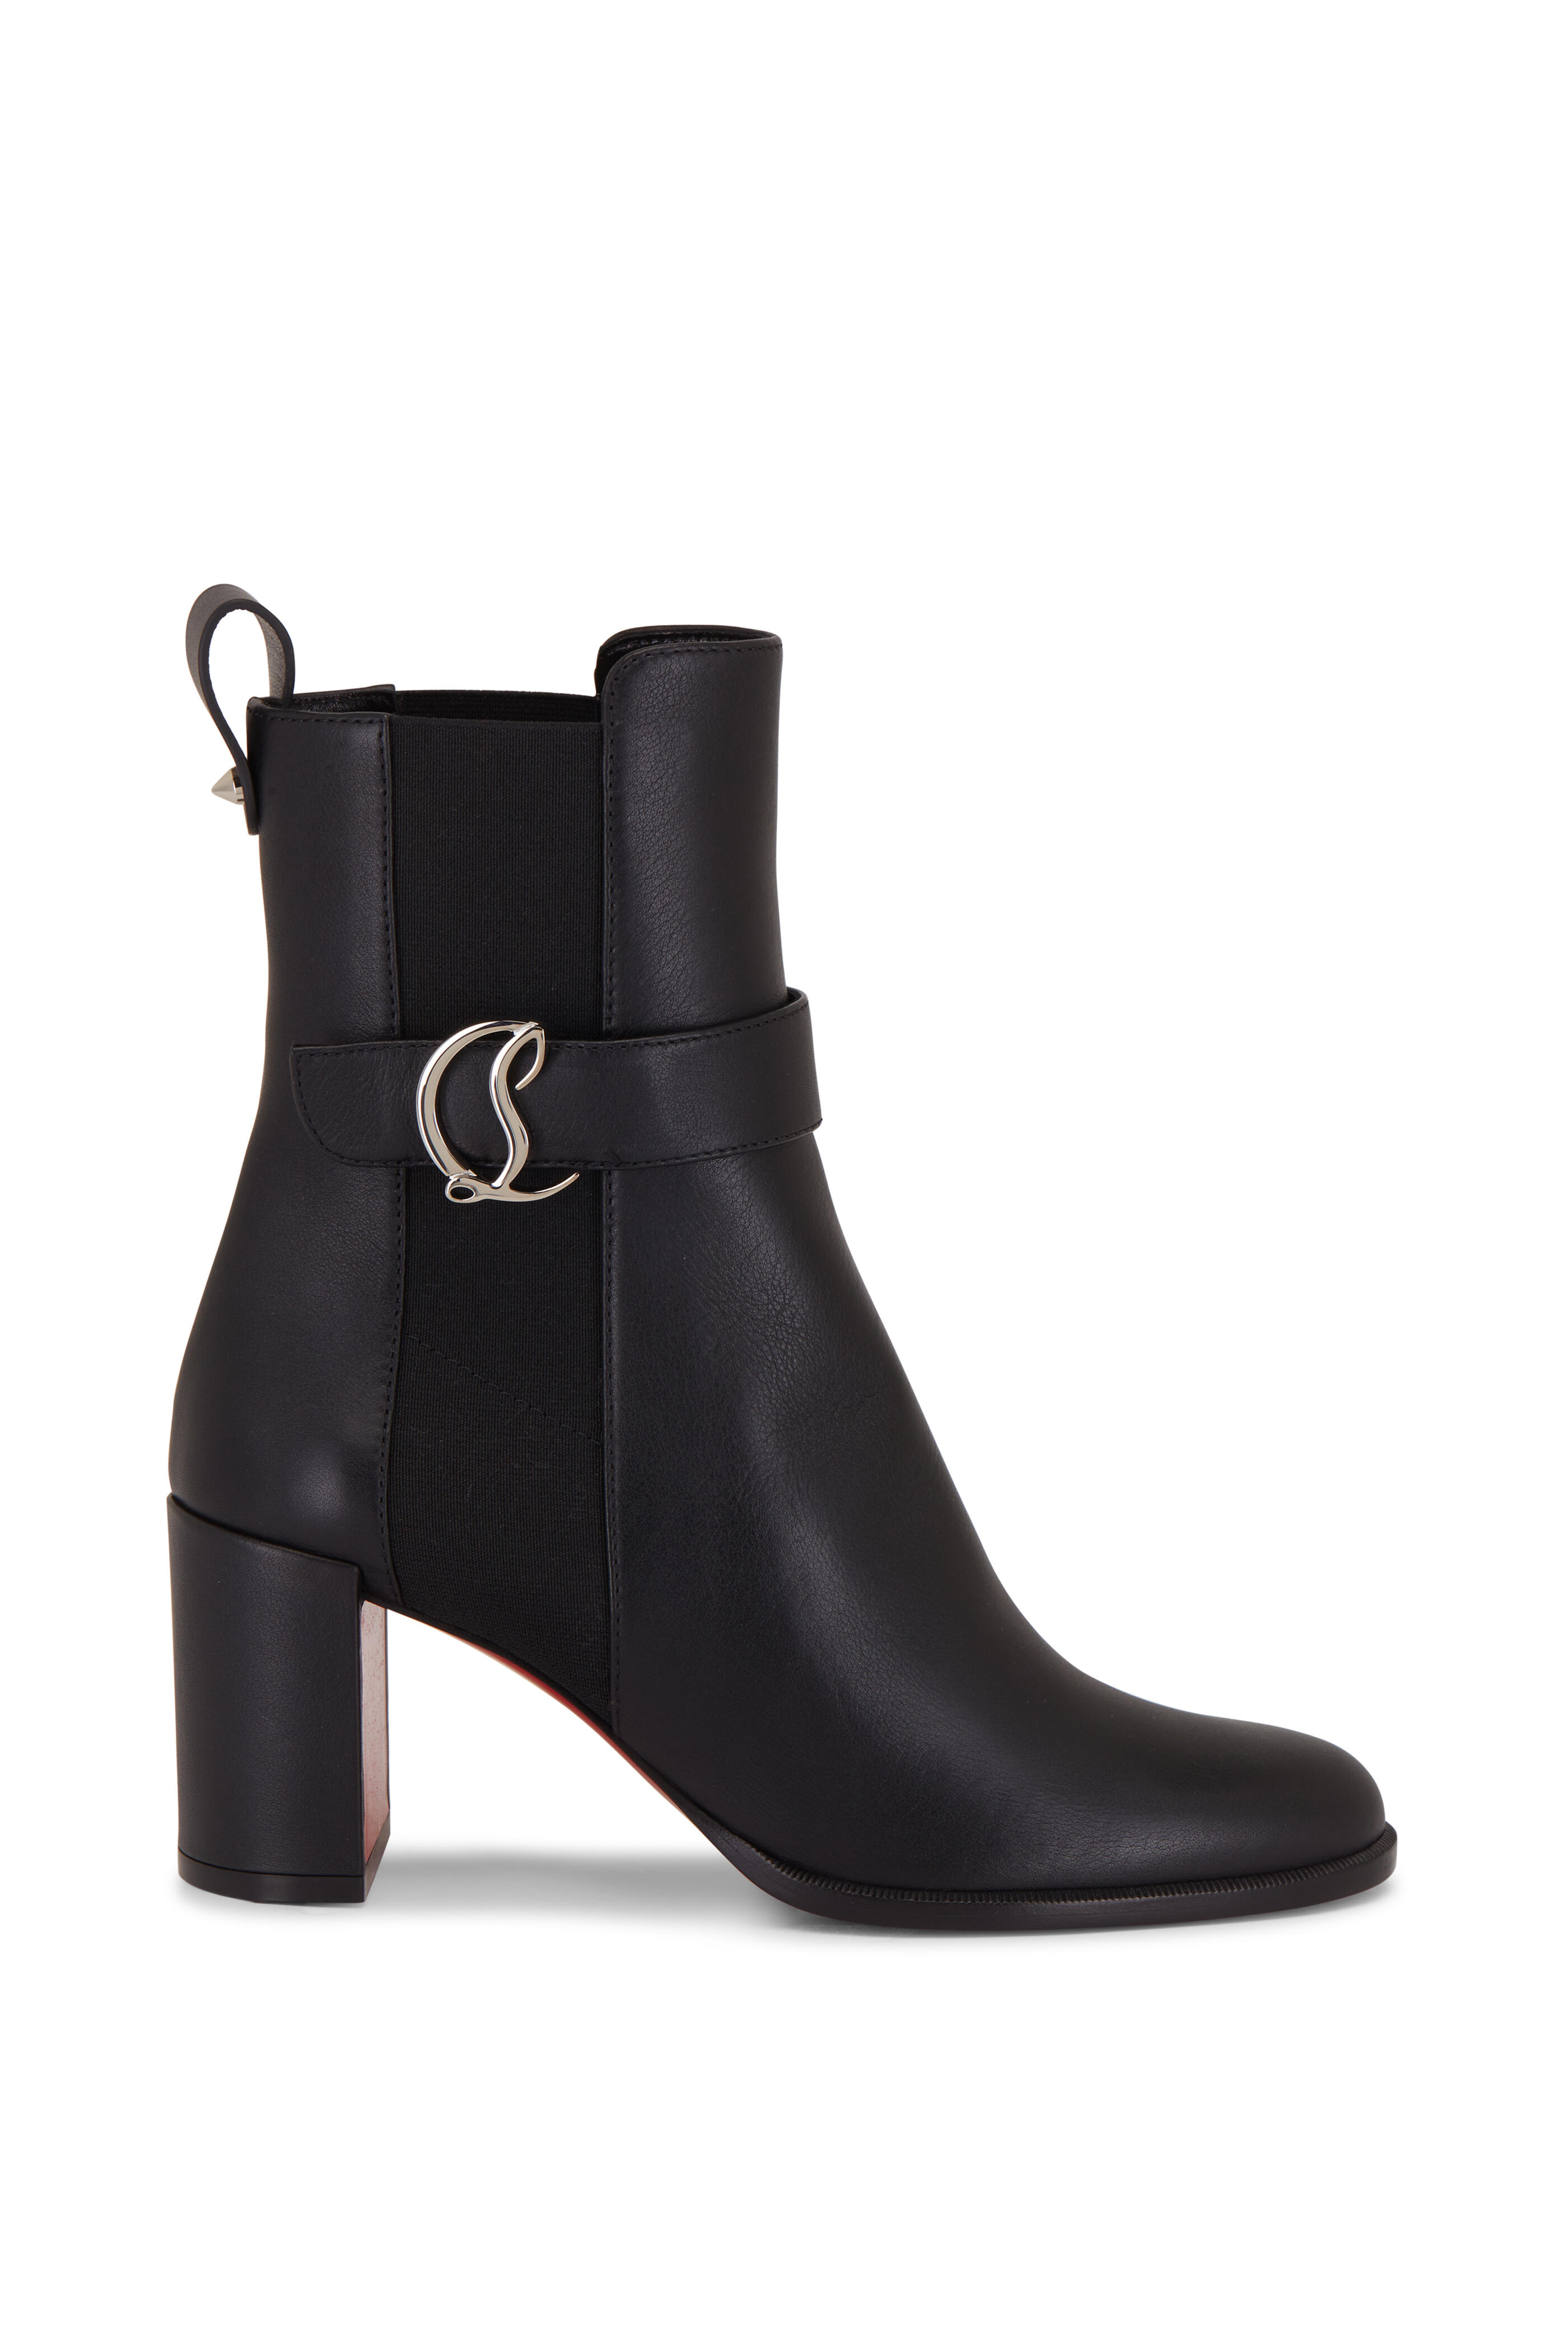 Christian Louboutin - Black Leather CL Chelsea Bootie, 70mm